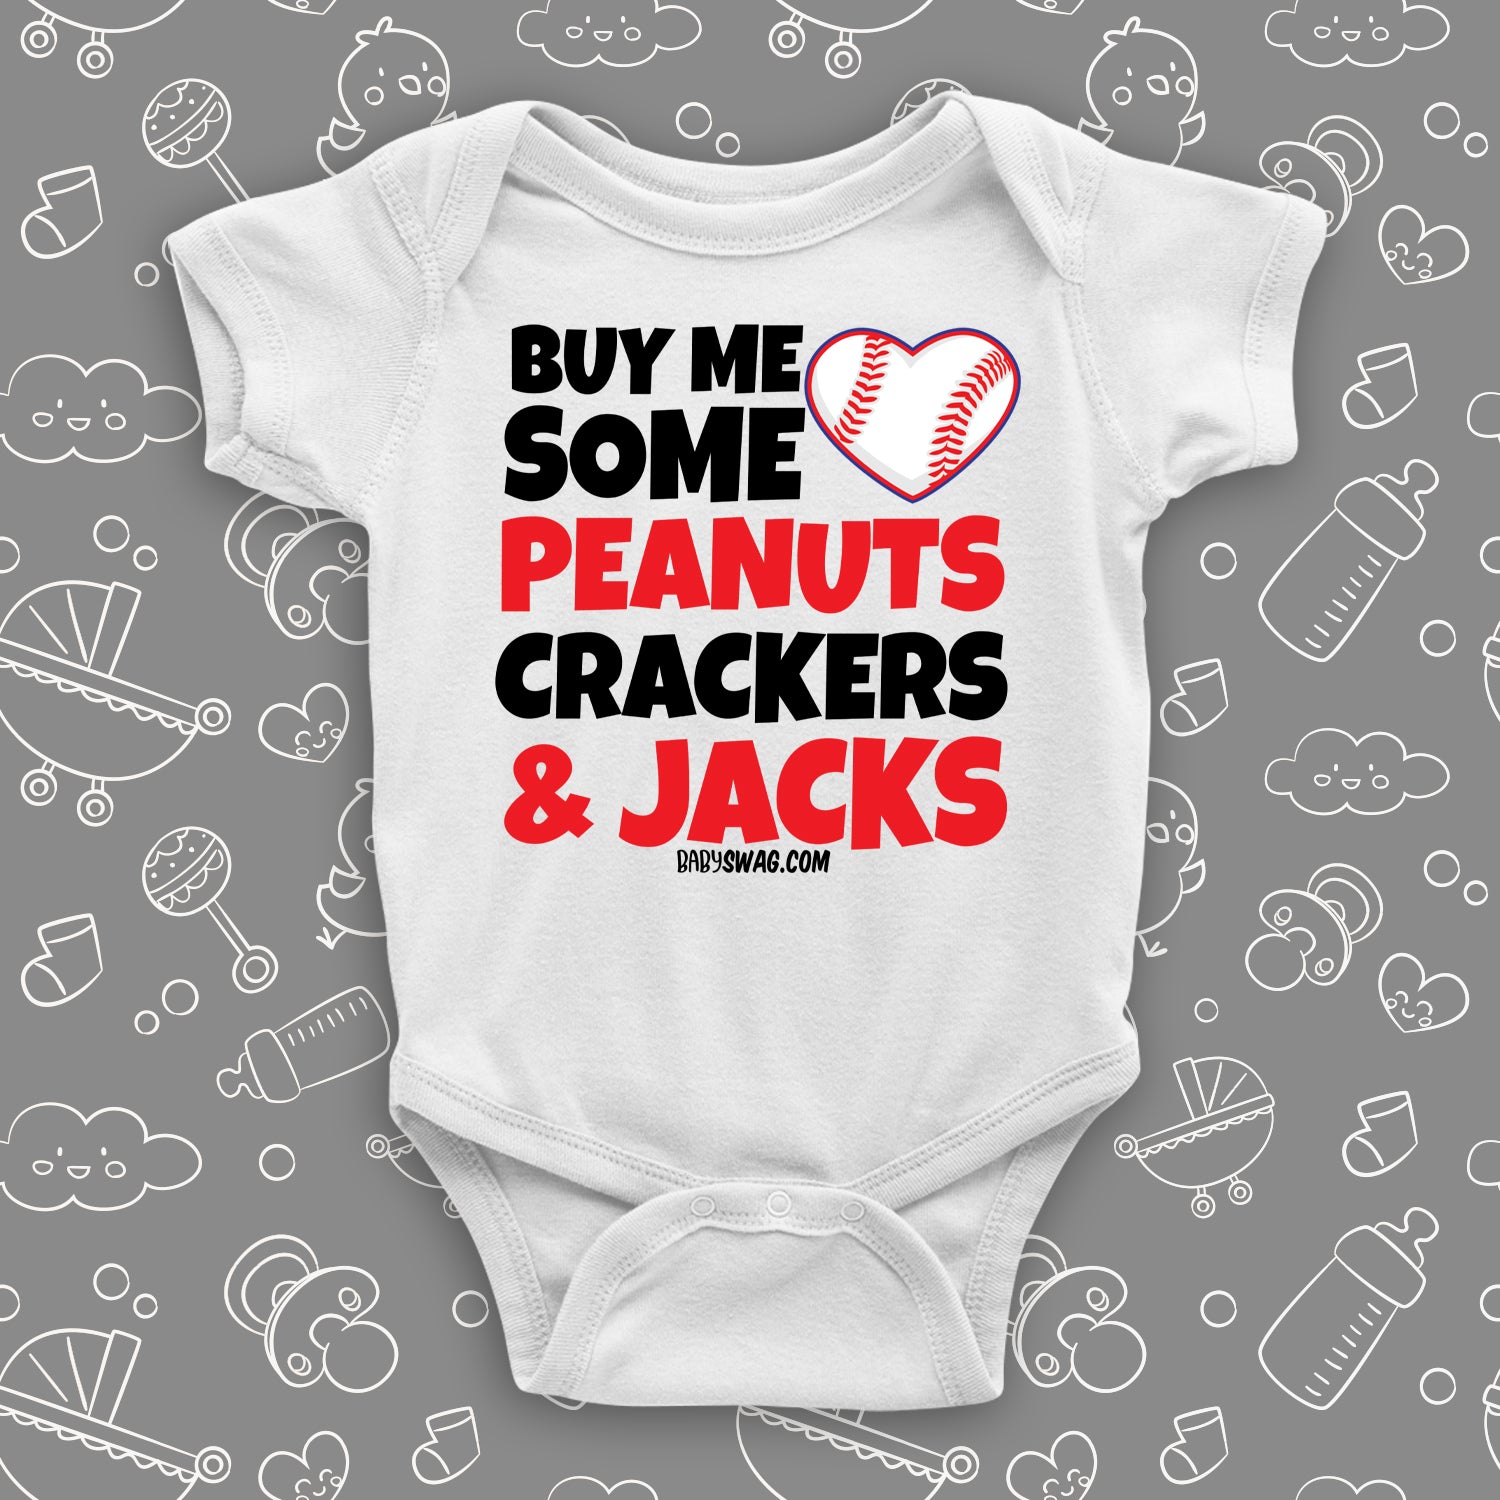 Cute baby onesies with saying "Buy Me Some Peanuts, Cracker & Jacks" in white. 